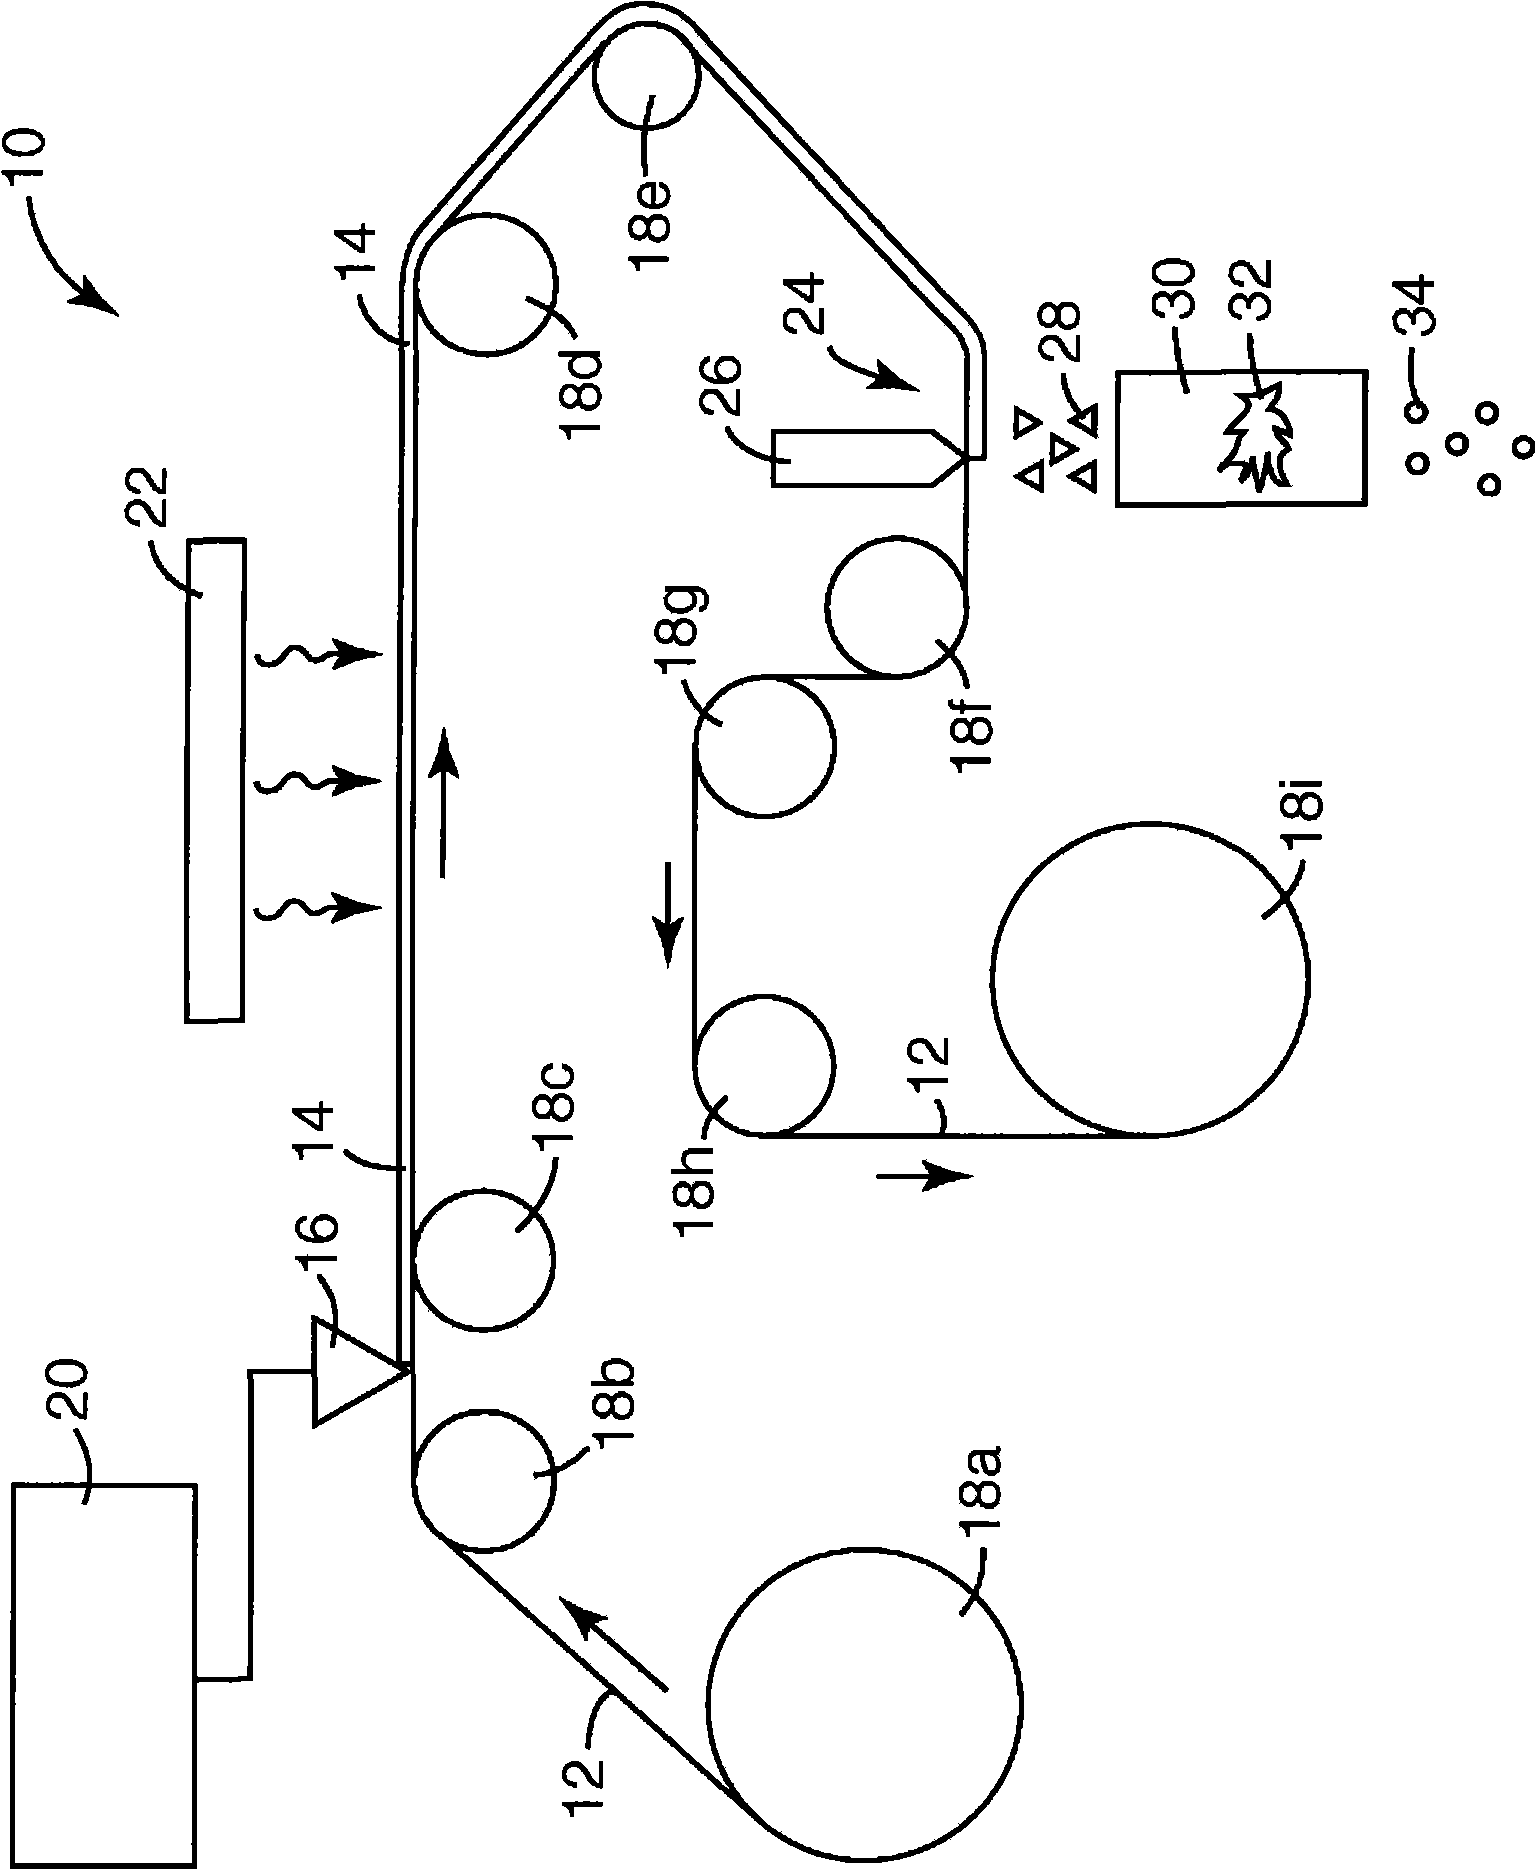 Method of making inorganic, metal oxide spheres using microstructured molds